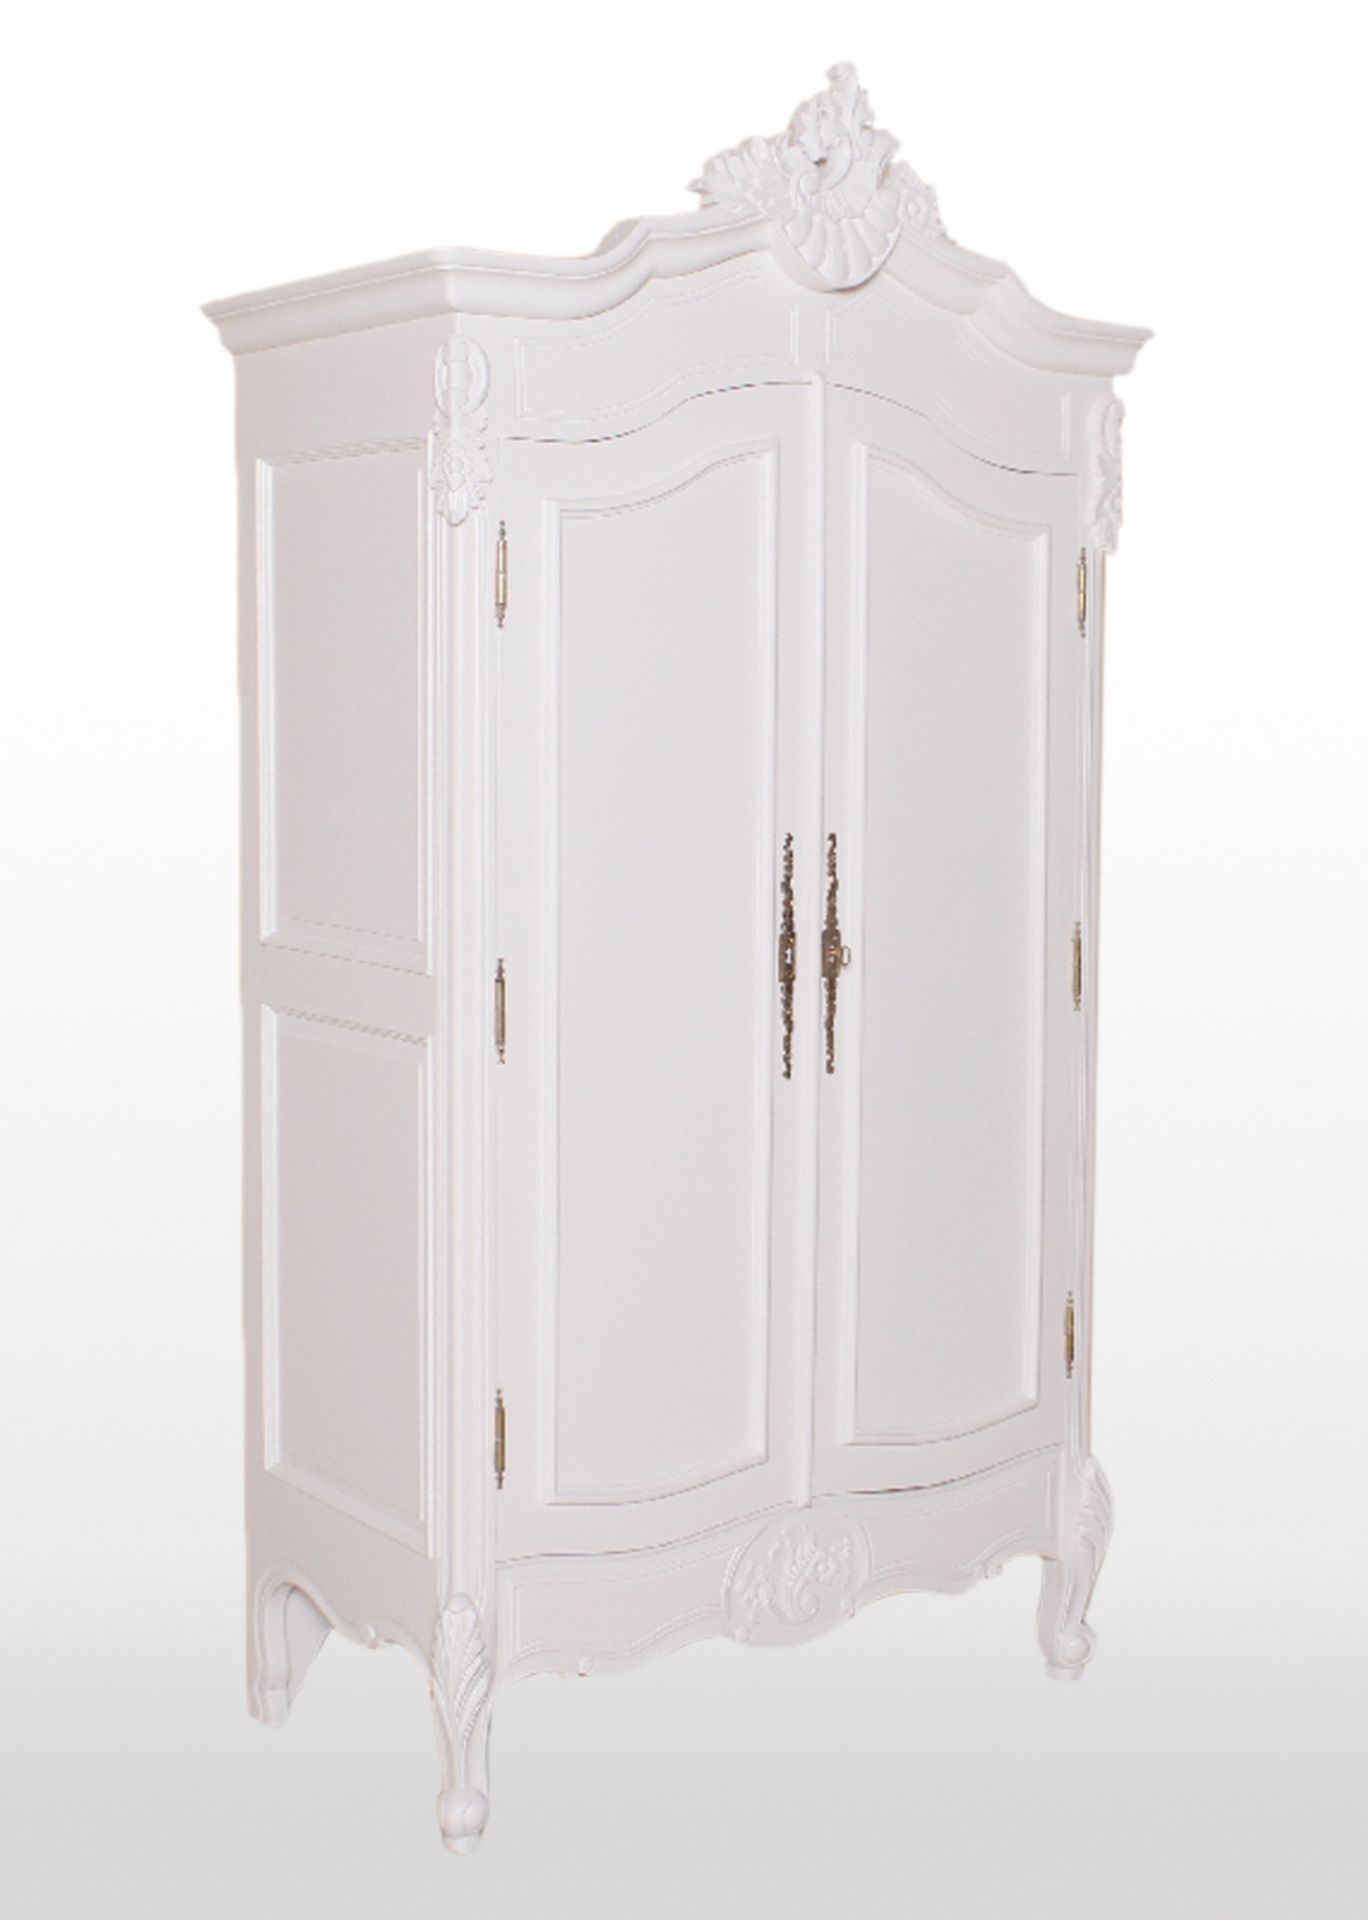 NEW PACKAGED BOUTIQUE HIGH QUALITY SOLID MAHOGANY LARGE DOUBLE WOOD DOOR WARDOBE IN WHITE